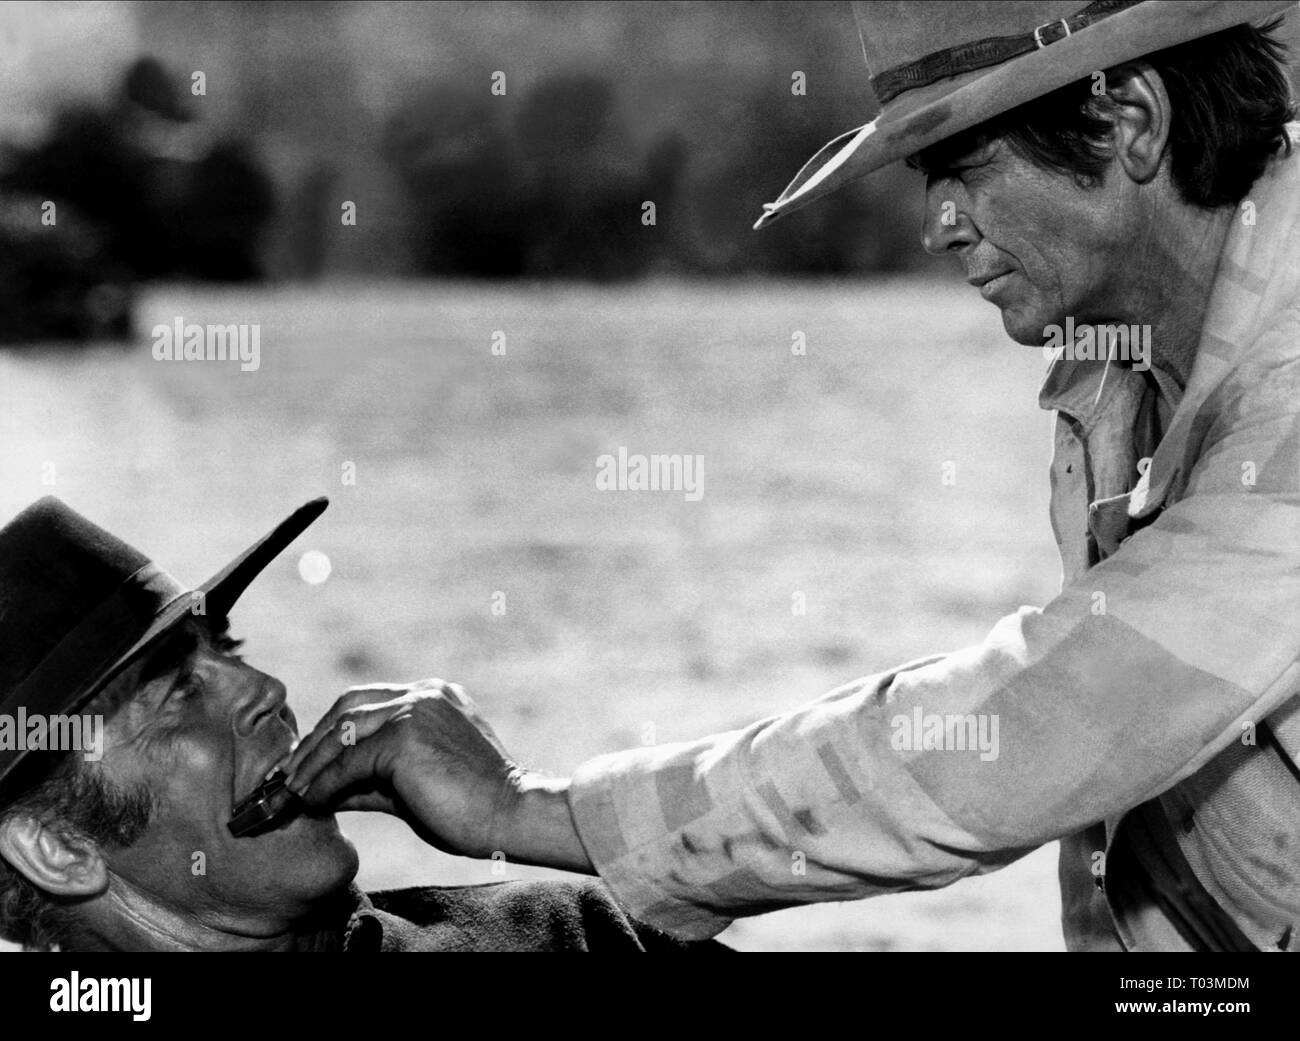 HENRY FONDA, CHARLES BRONSON, ONCE UPON A TIME IN THE WEST, 1968 Stock Photo